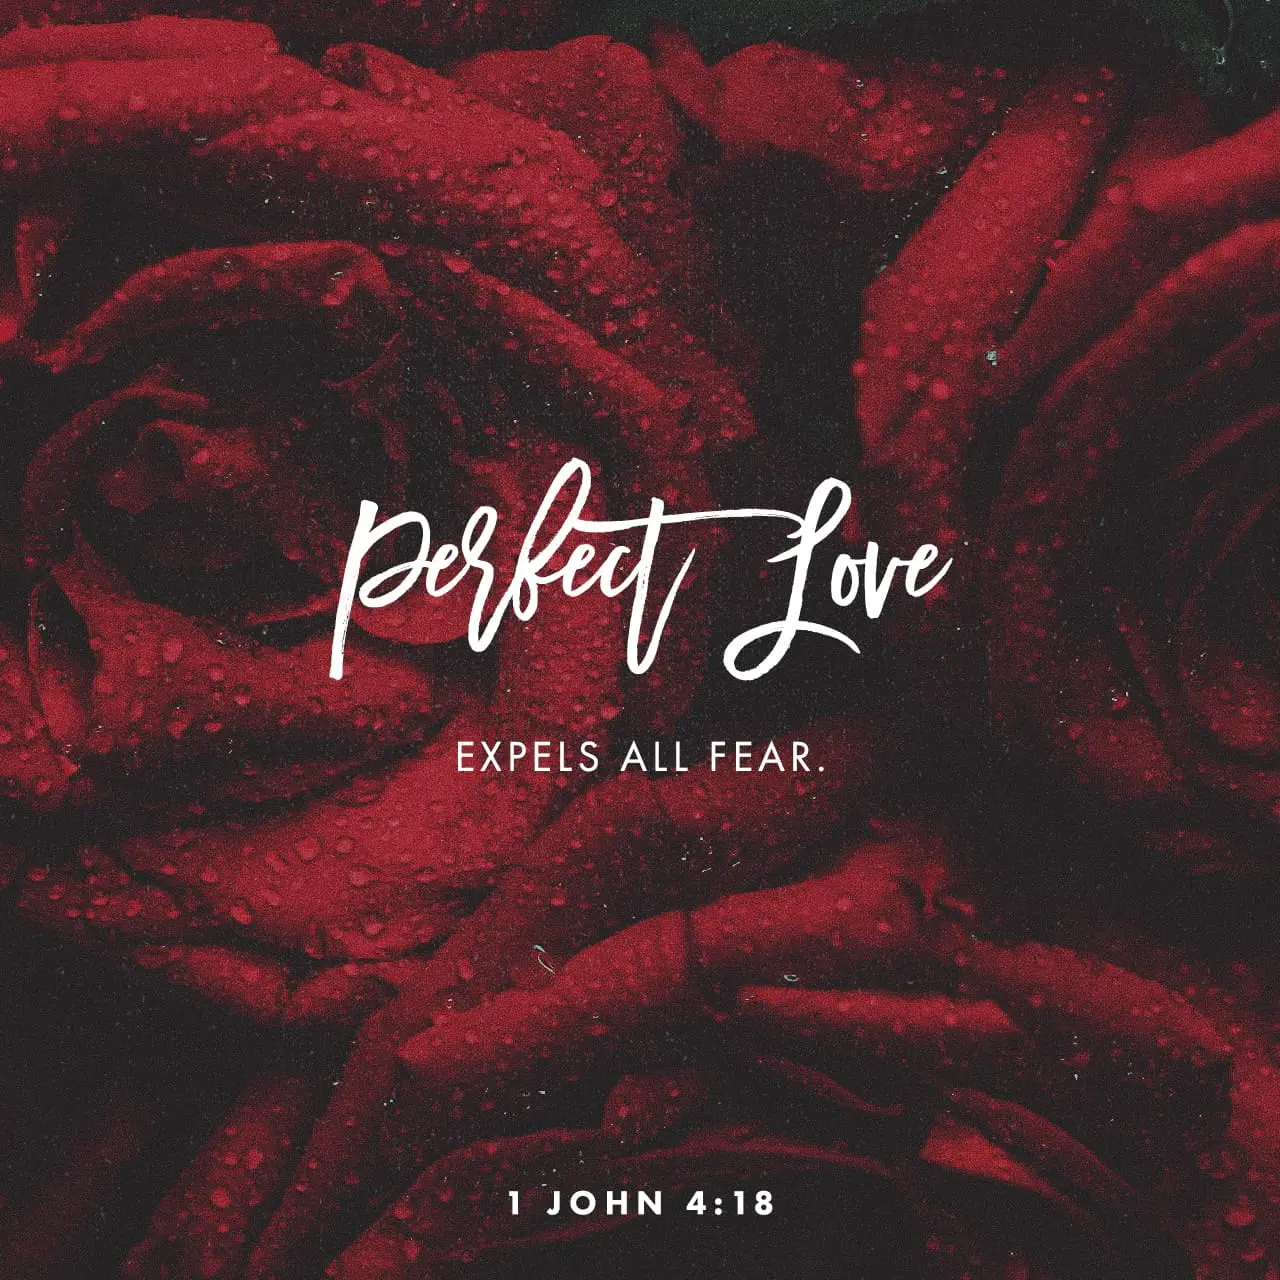 Perfect love expels all fear